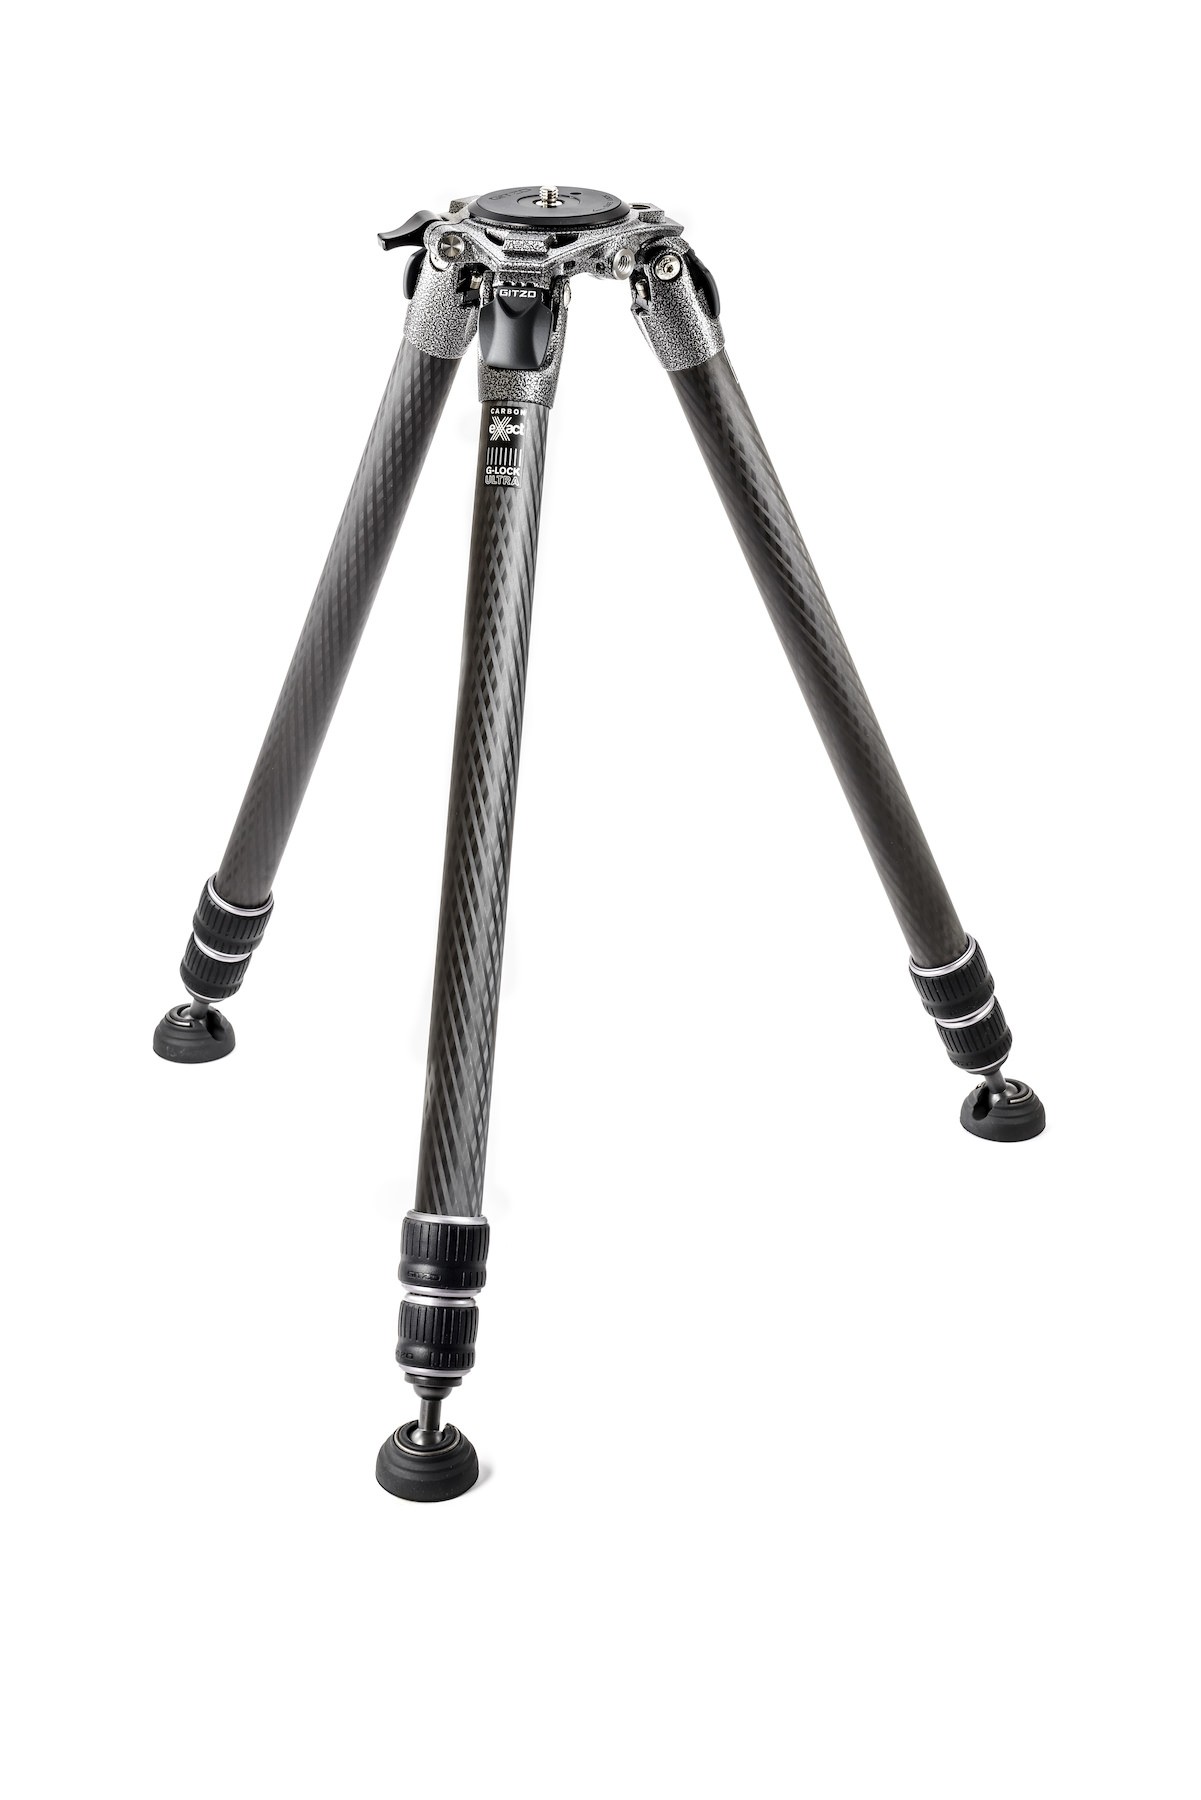 Gitzo tripod Systematic, series 3, 3 sections